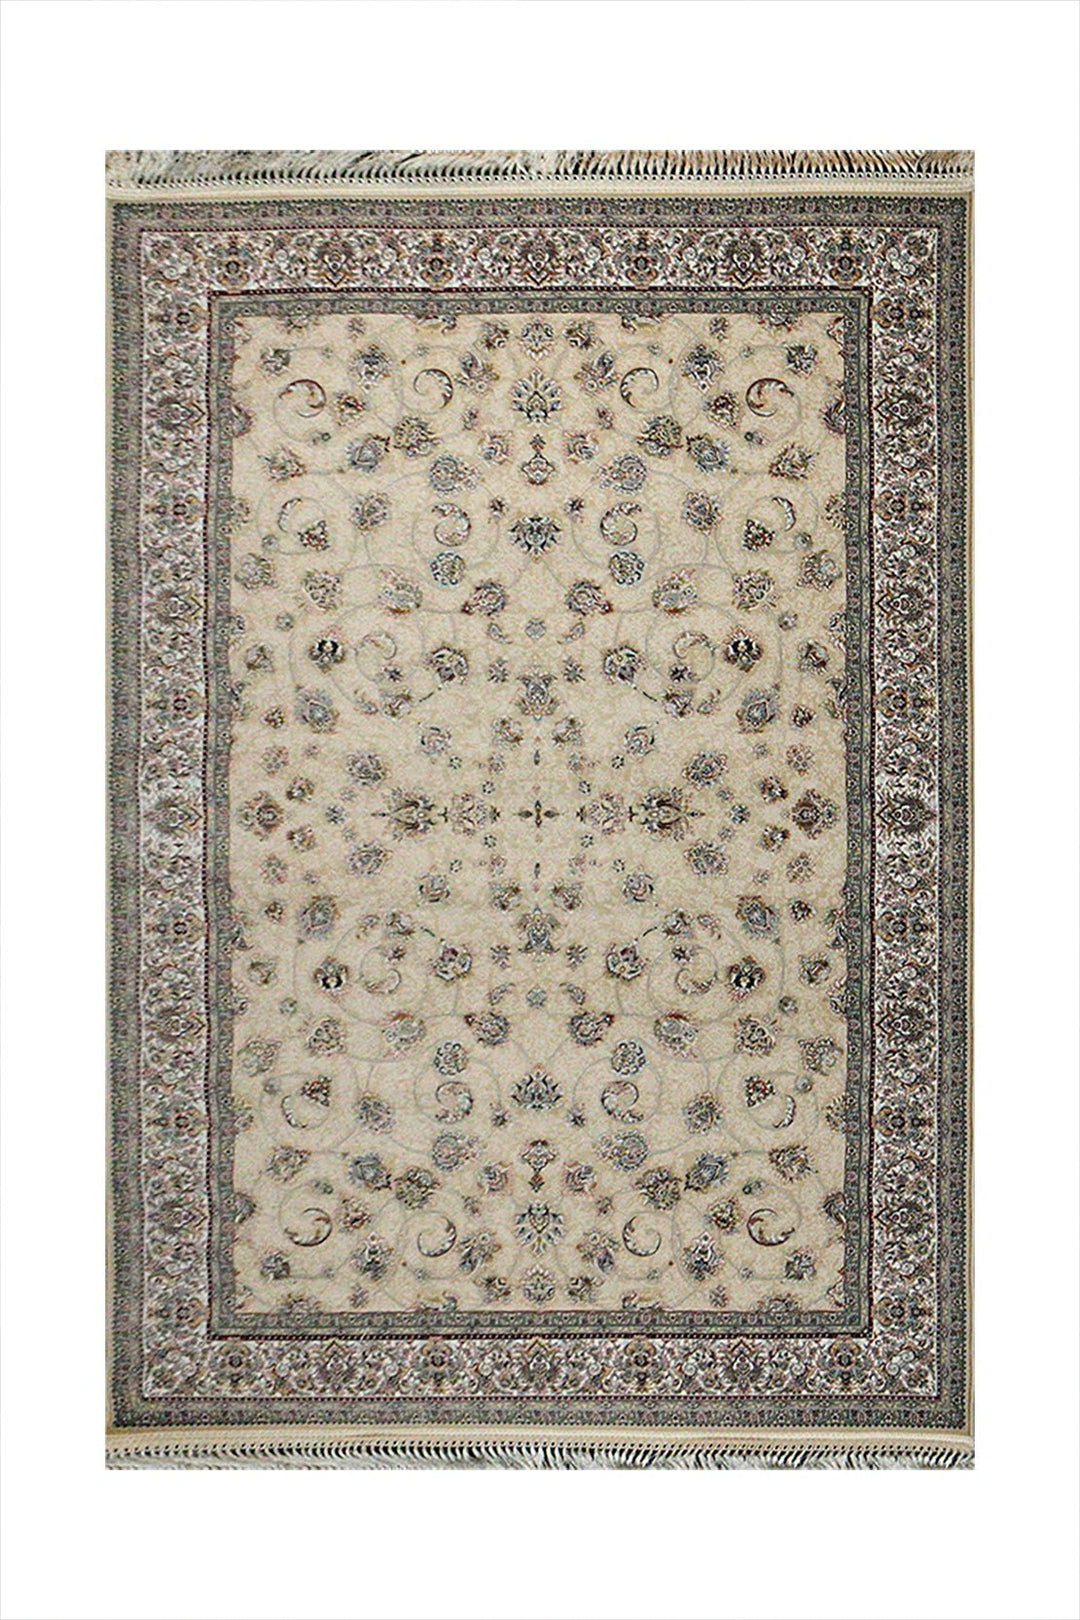 Iranian Premium Quality Moonaco Collection Rug - 4.9 x 7.3 FT - Beige - Resilient Construction for Long-Lasting Use - V Surfaces